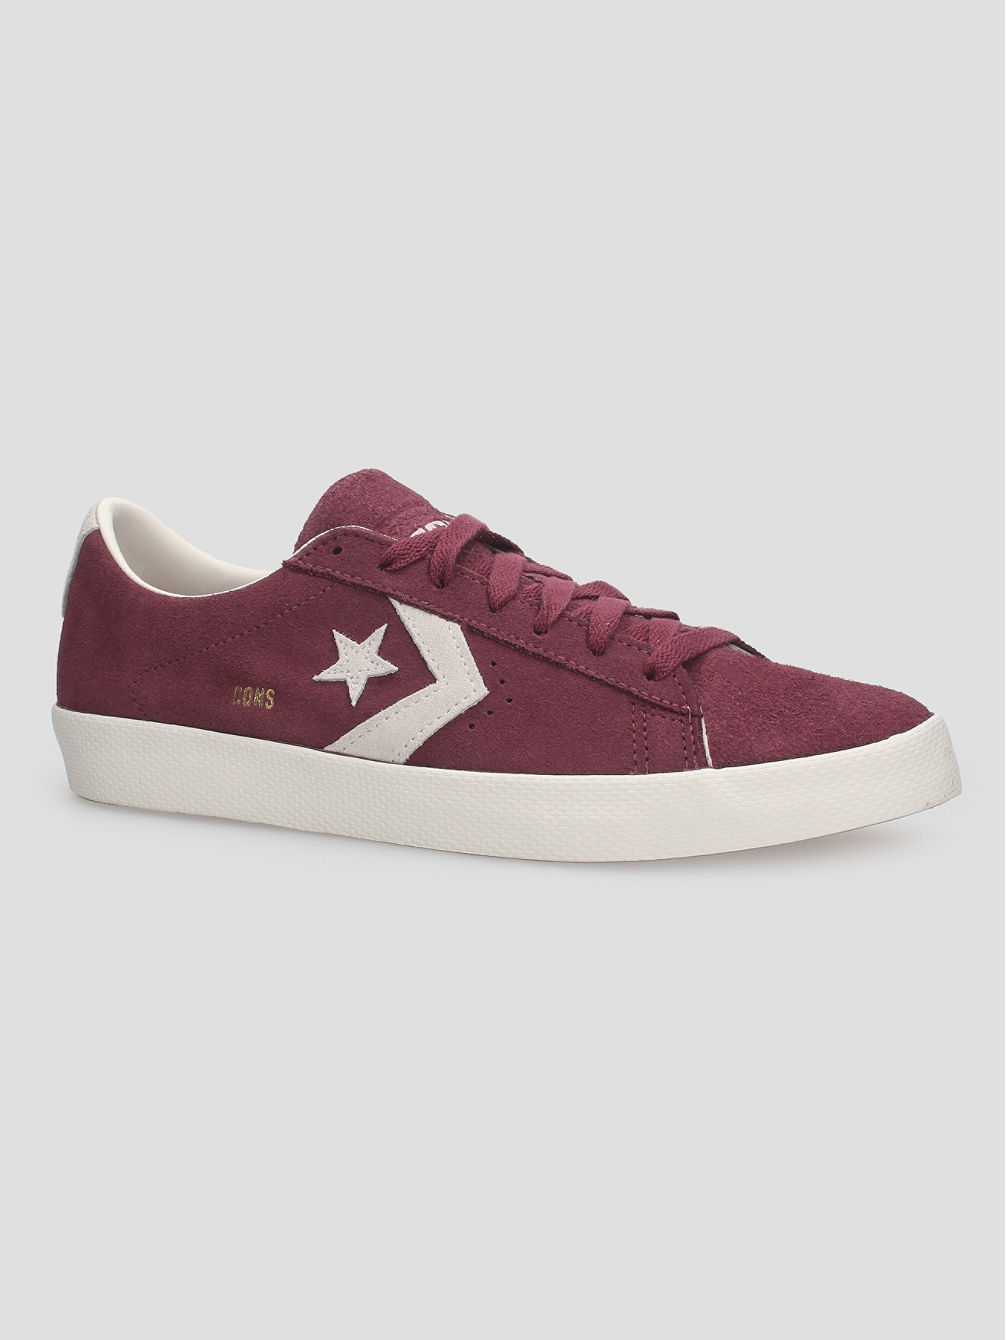 Cons Pl Vulc Pro Suede Skate boty